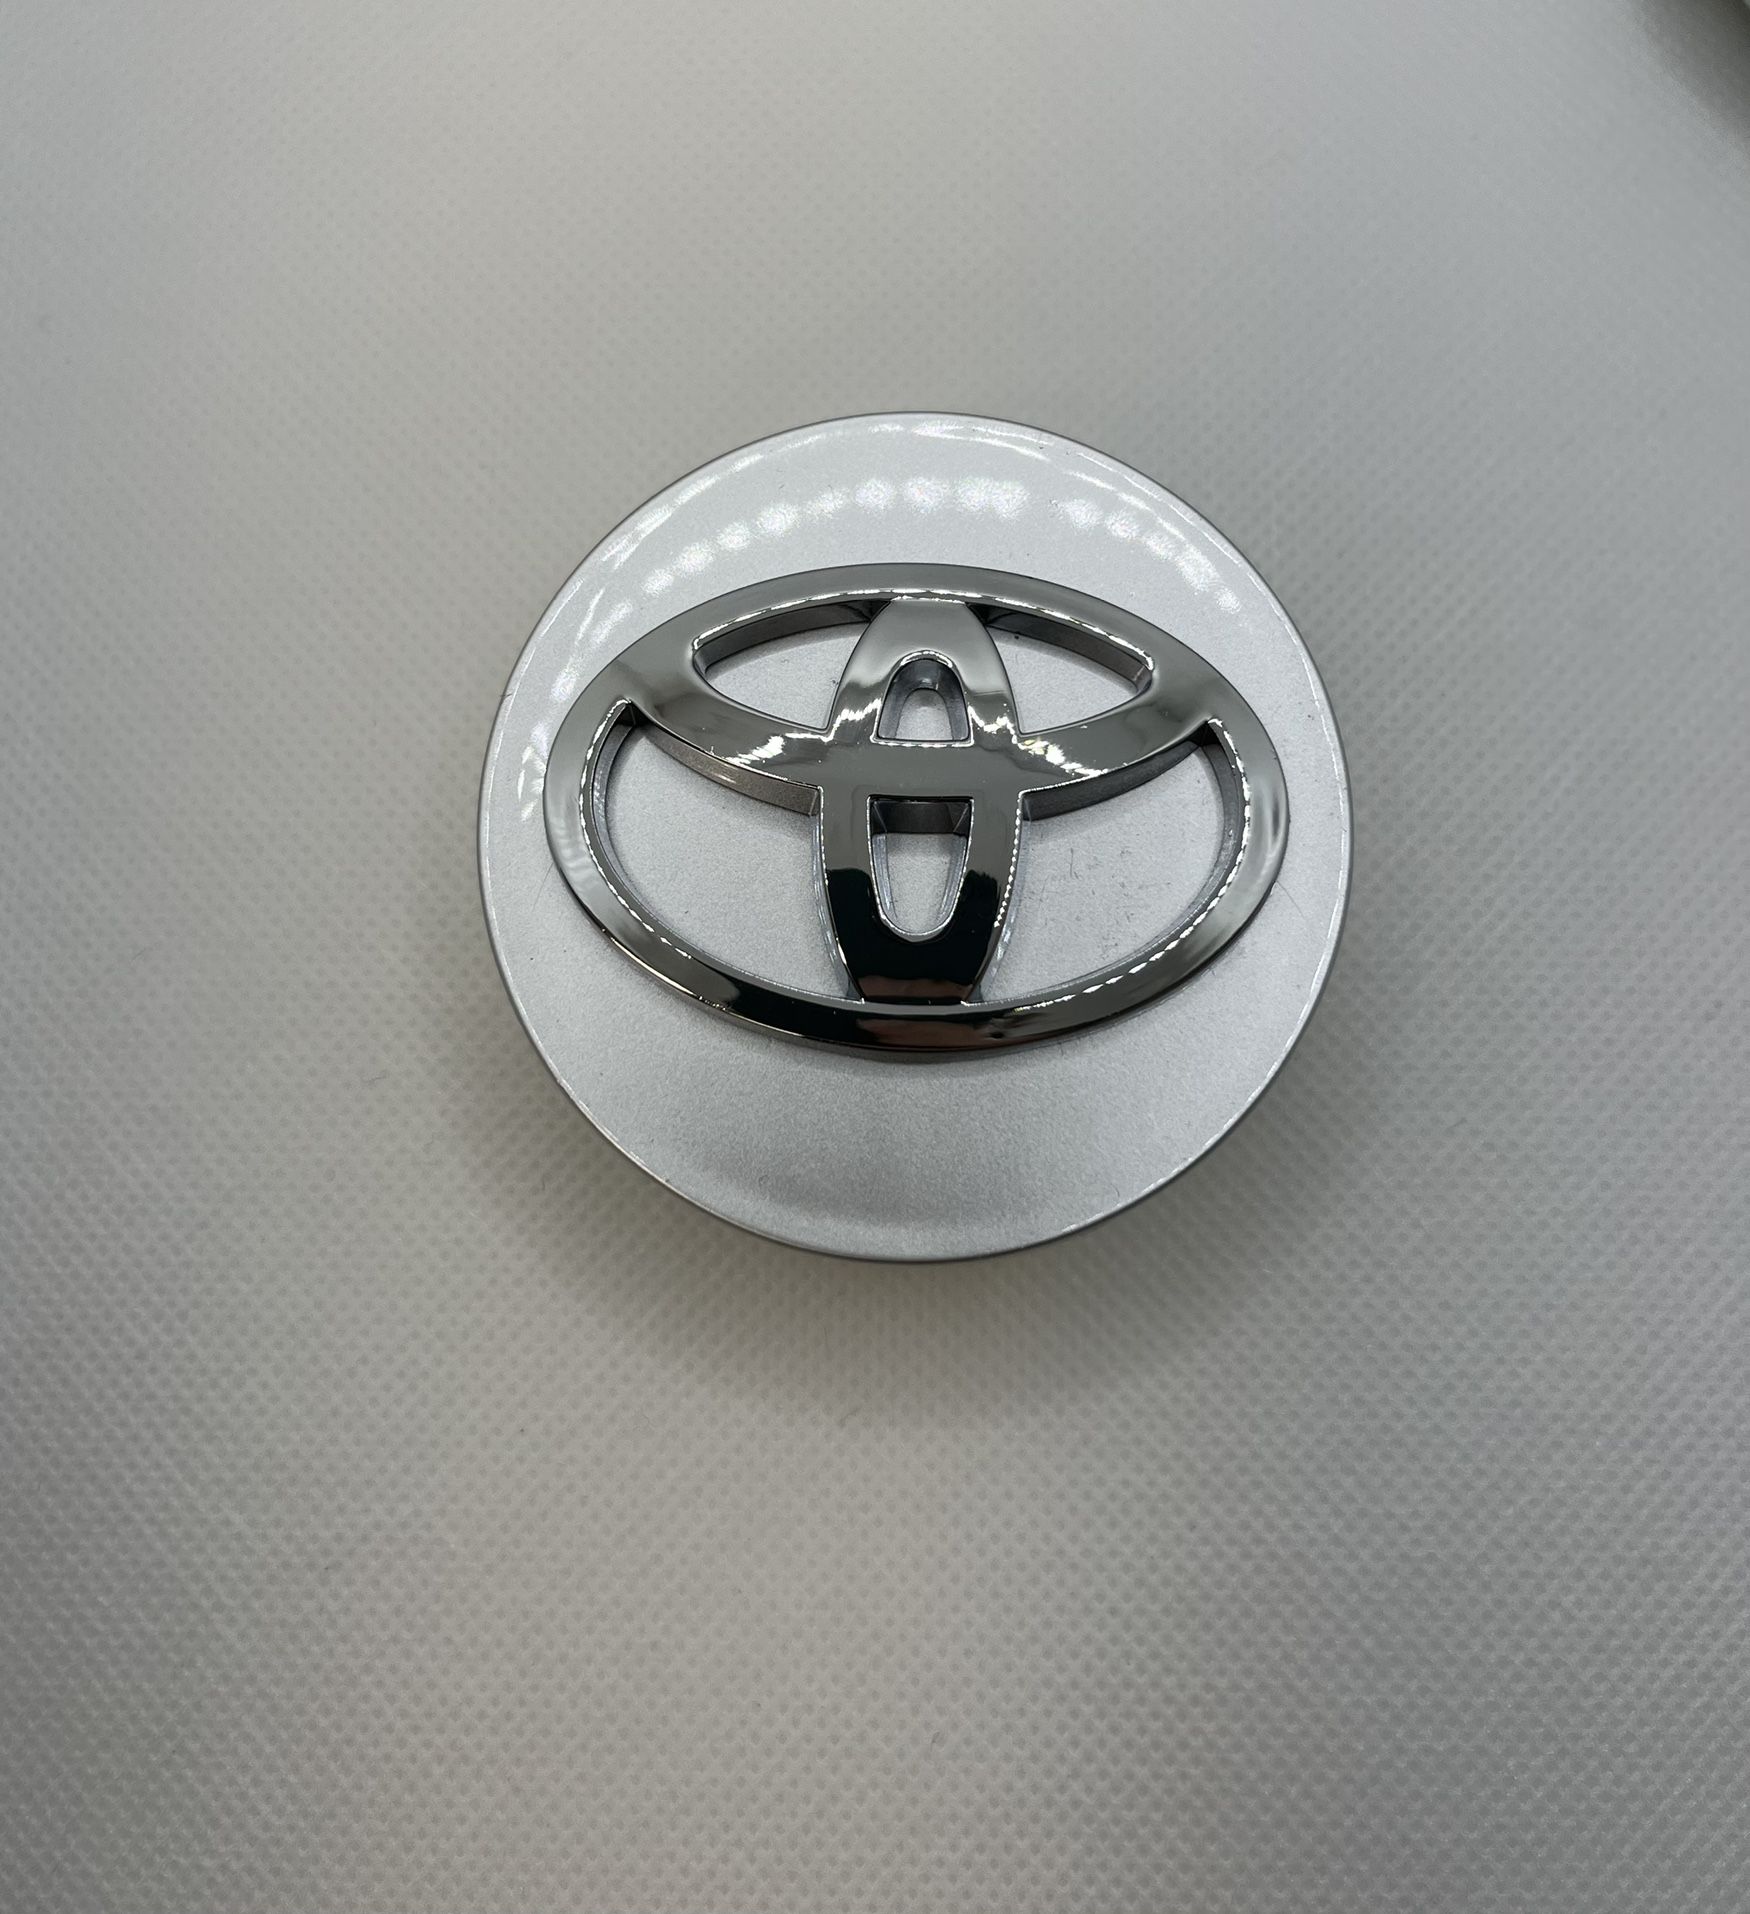 Set Of 4 Toyota Center Caps Silver With Chrome 62mm Camry Avalon Corolla 